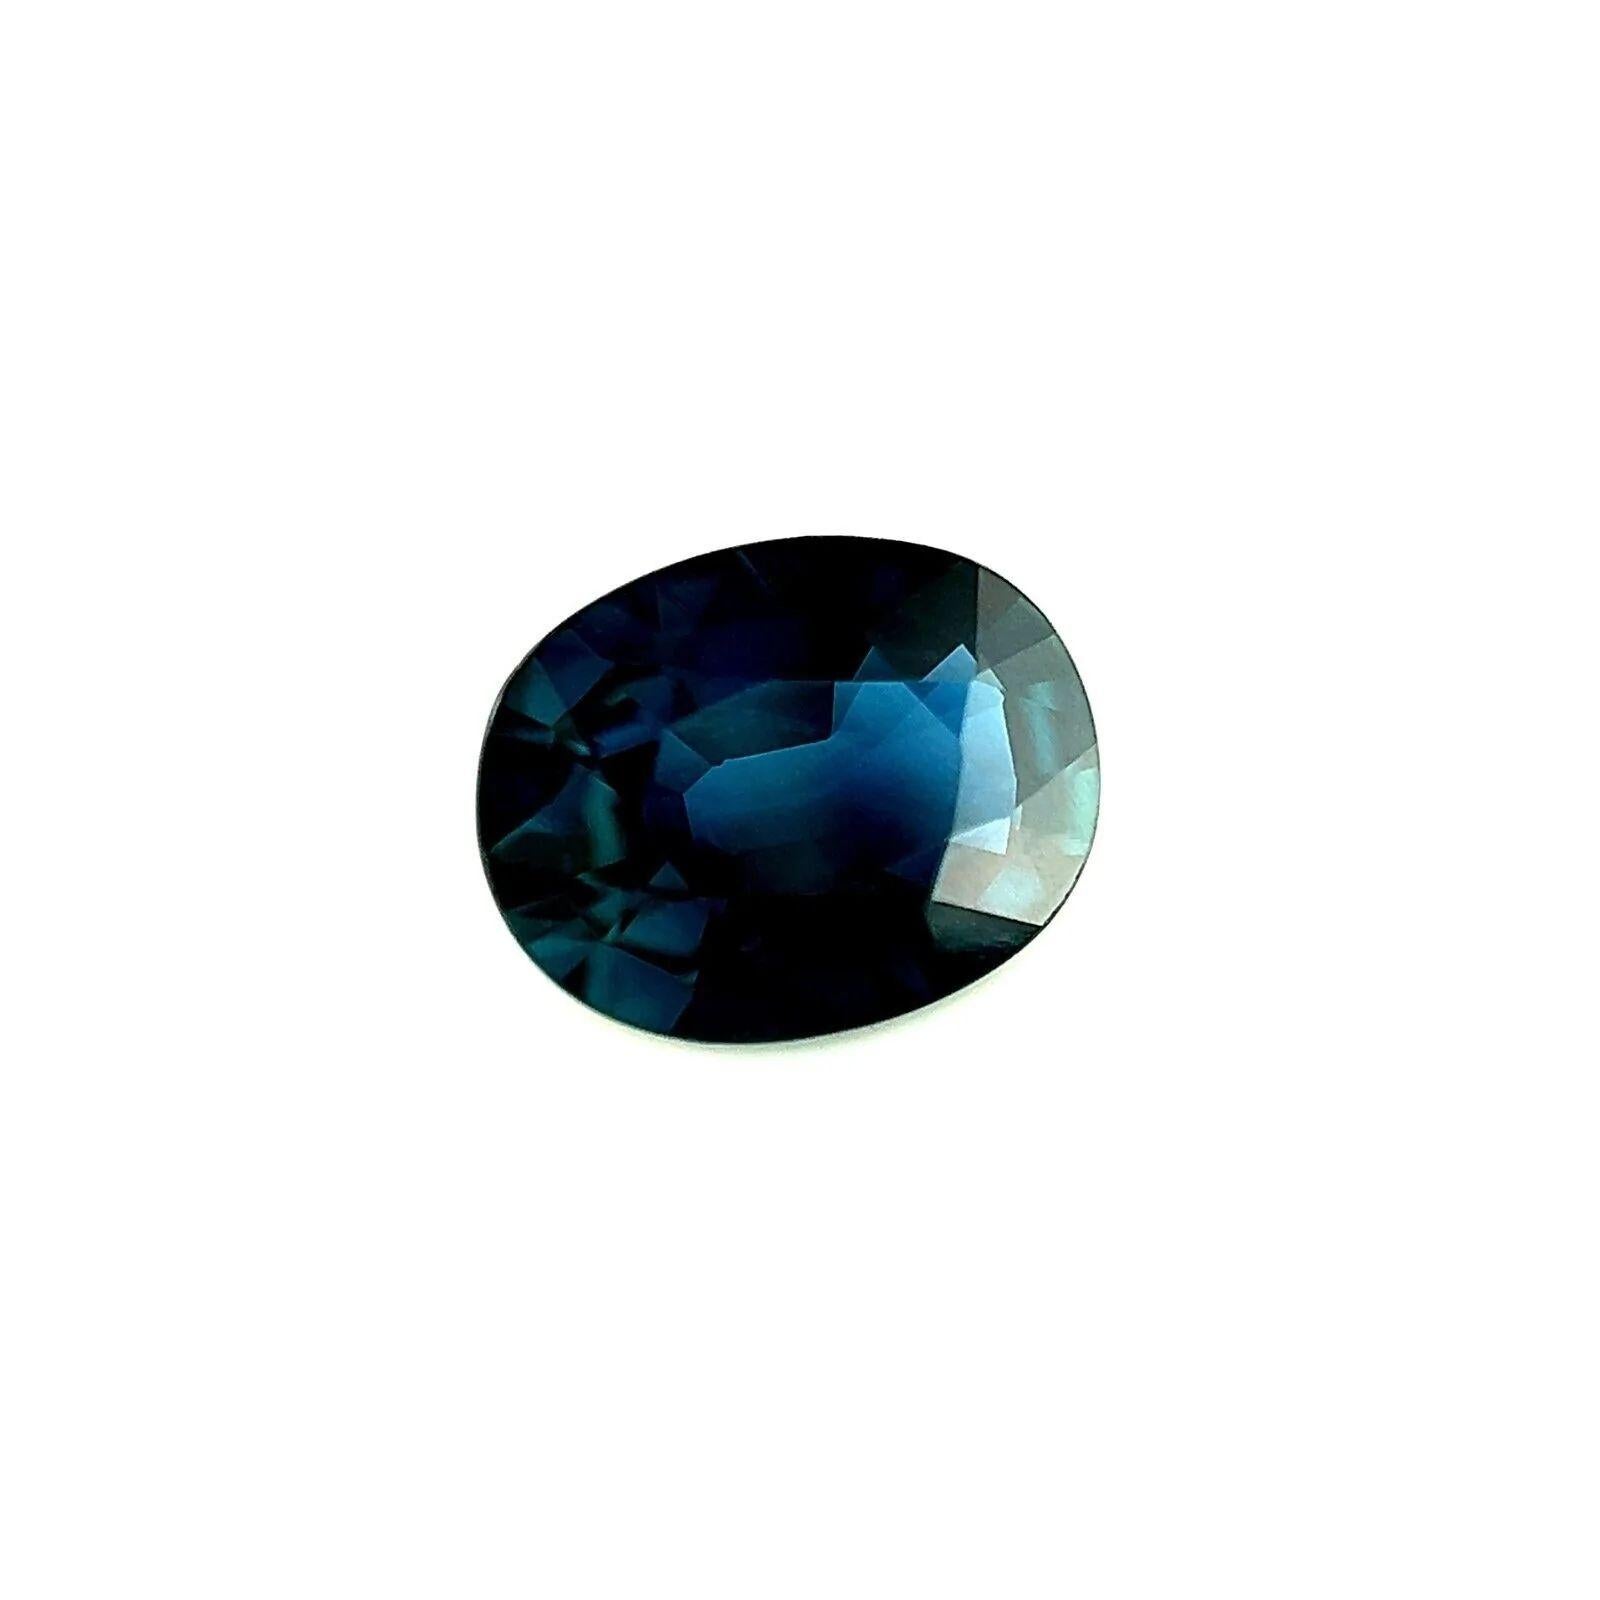 1.26ct Deep Blue Sapphire Oval Cut Rare 7.6x5.8mm Loose Gemstone VS

Natural Oval Cut Deep Blue Sapphire Gemstone.
1.26 Carat sapphire with a beautiful deep blue colour.
Also has very good clarity, a clean stone with only some small natural